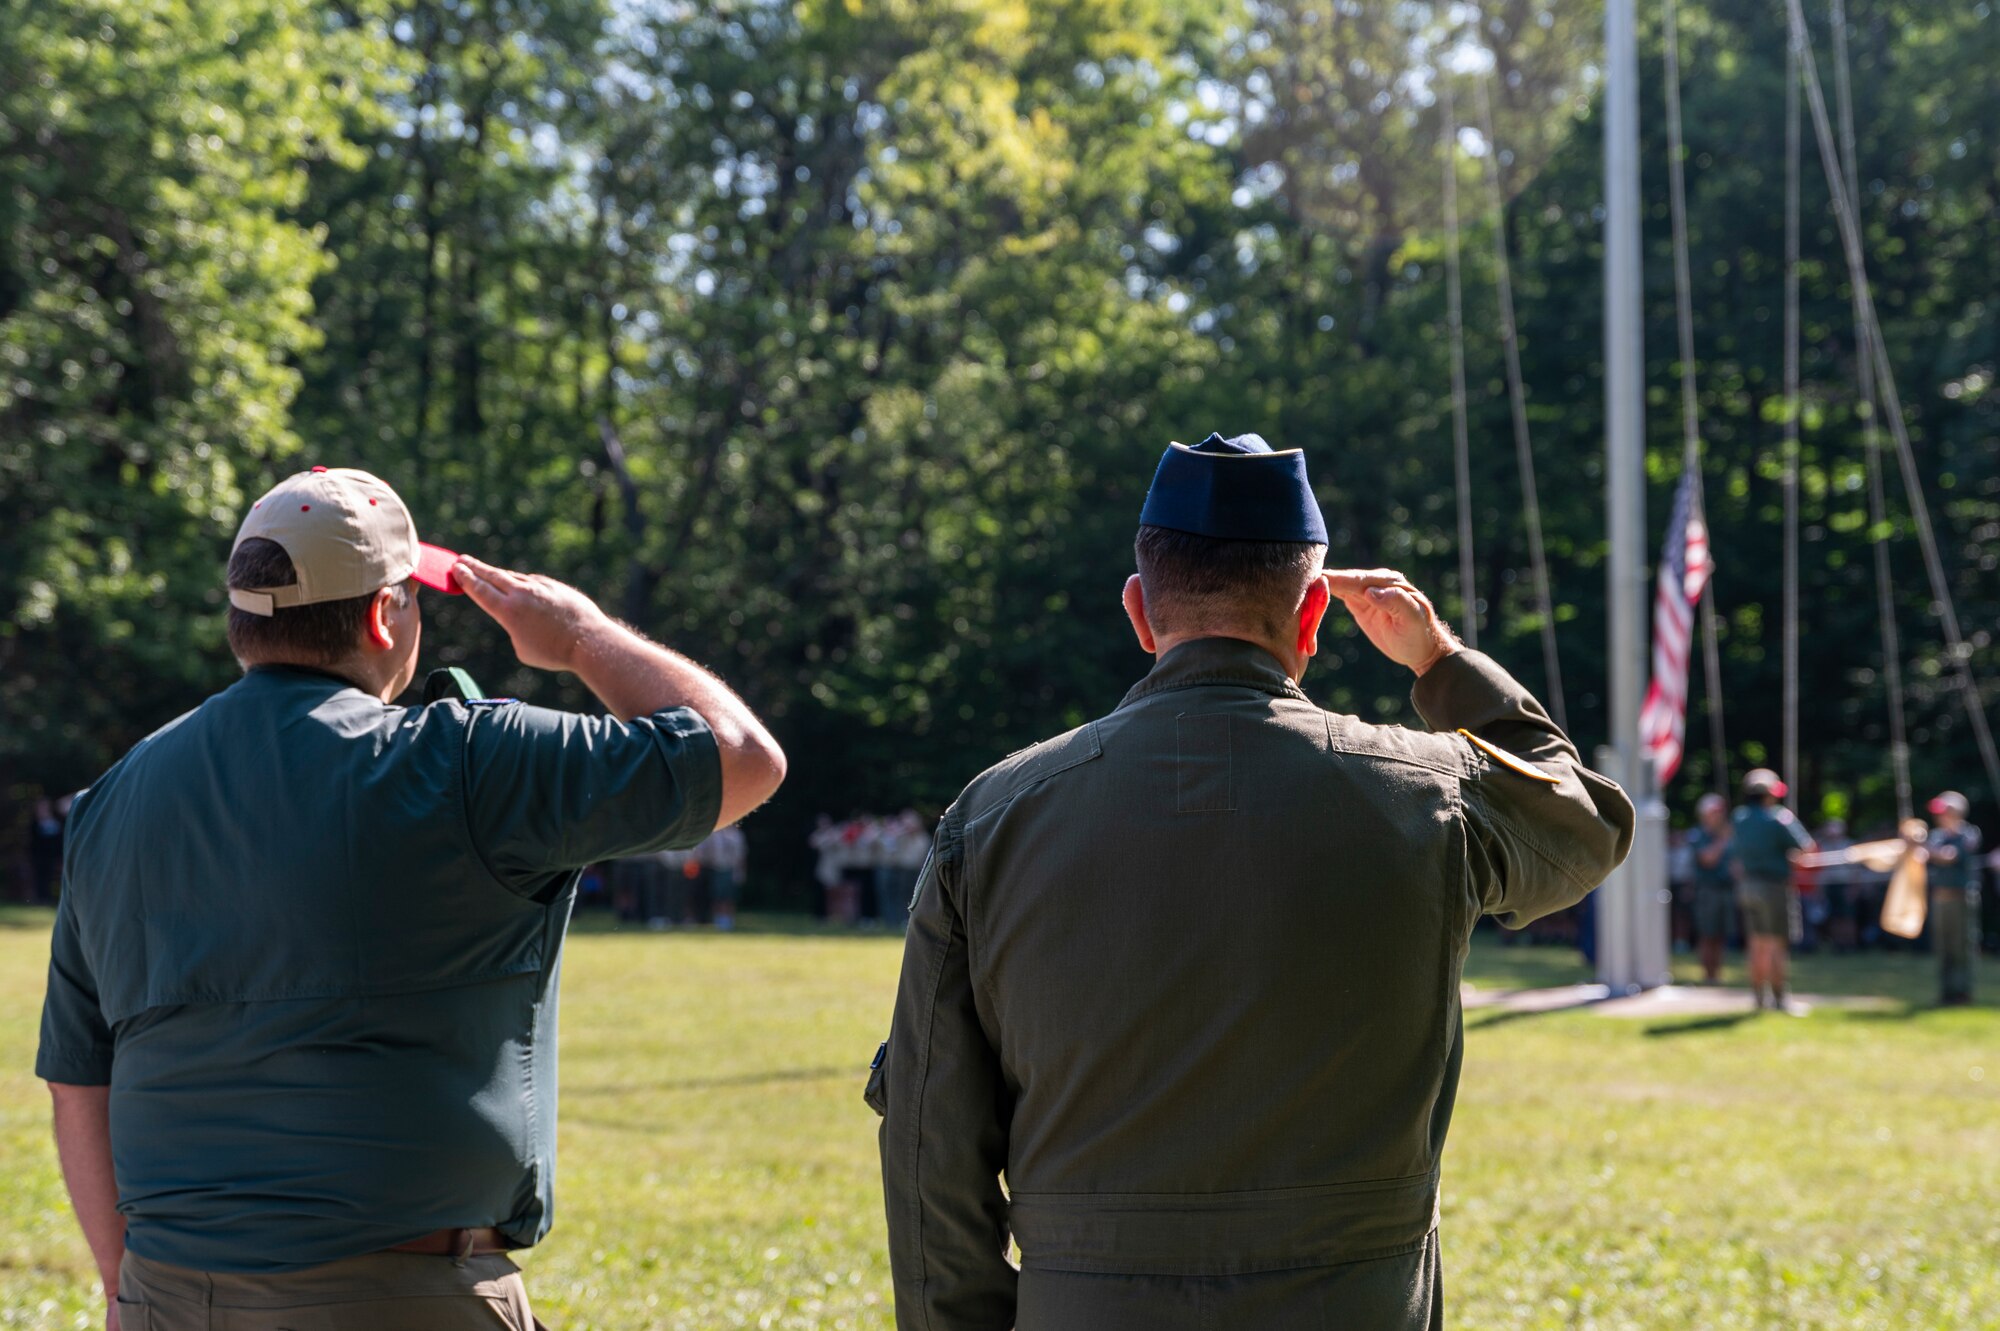 U.S. Air Force Brig. Gen. Christopher Amrhein (right), Air Force Recruiting Service commander, and James Feuerstein, camp director for boy Scouts of America’s Camp Minsi, salute the flag during the camp’s closing ceremony in Pocono Summit, Penn., July 22, 2023.